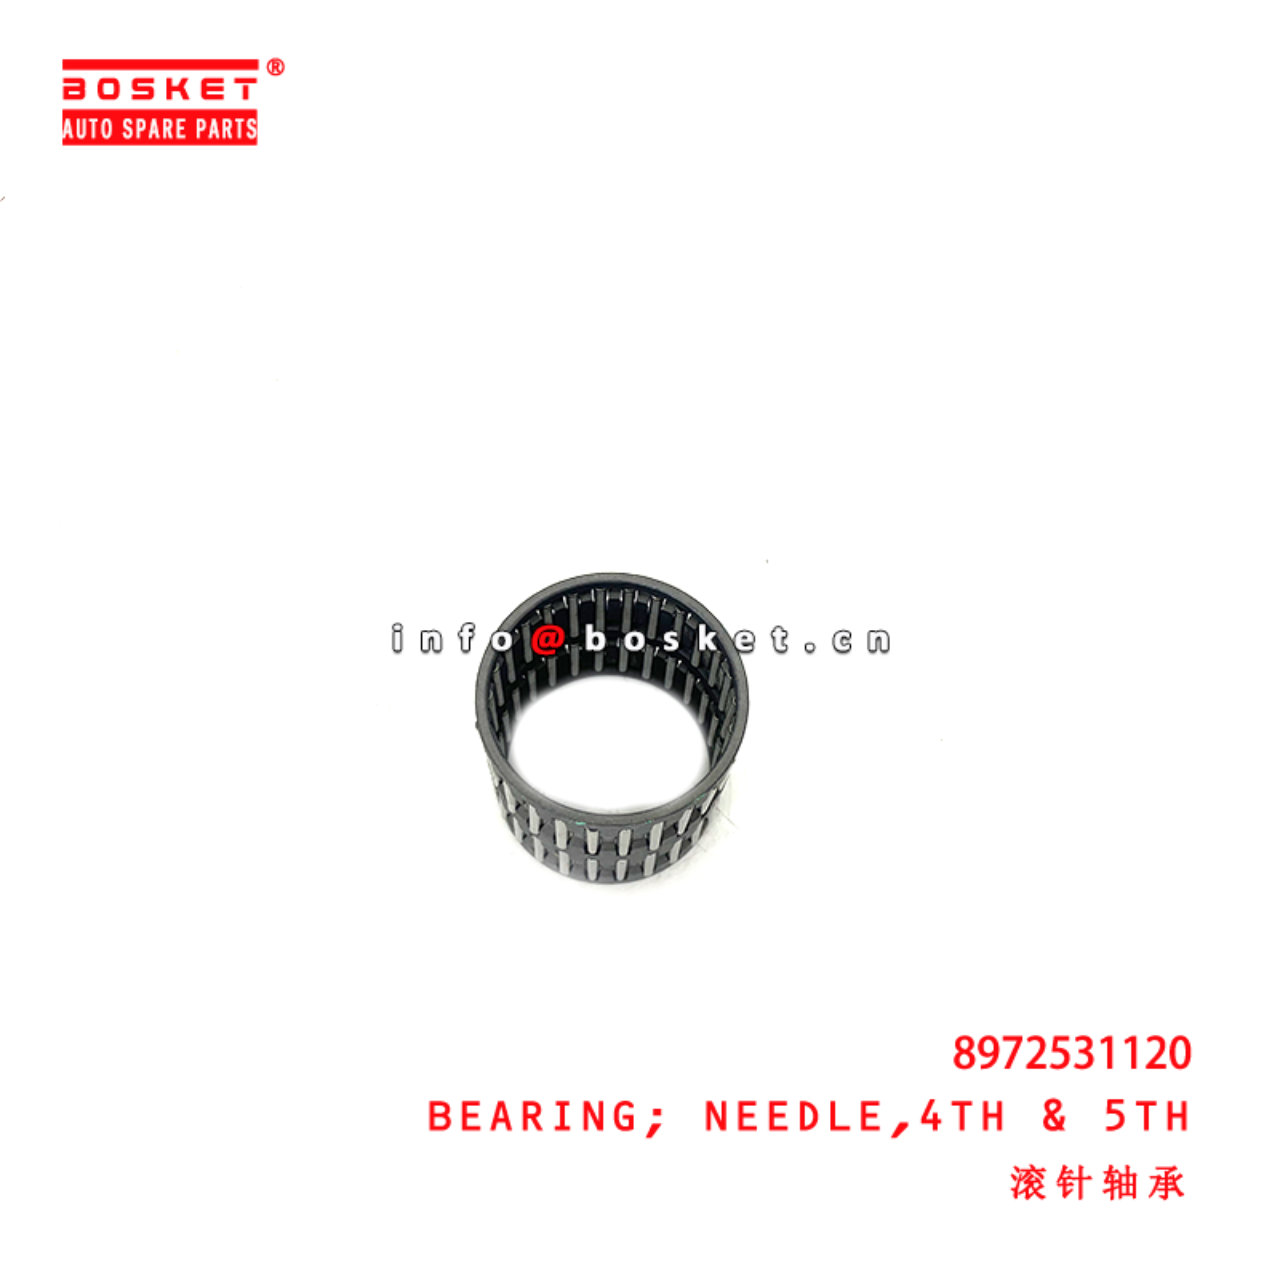 8-97253112-0 Fourth And Fifth Needle Bearing suitable for ISUZU NQR71  8972531120